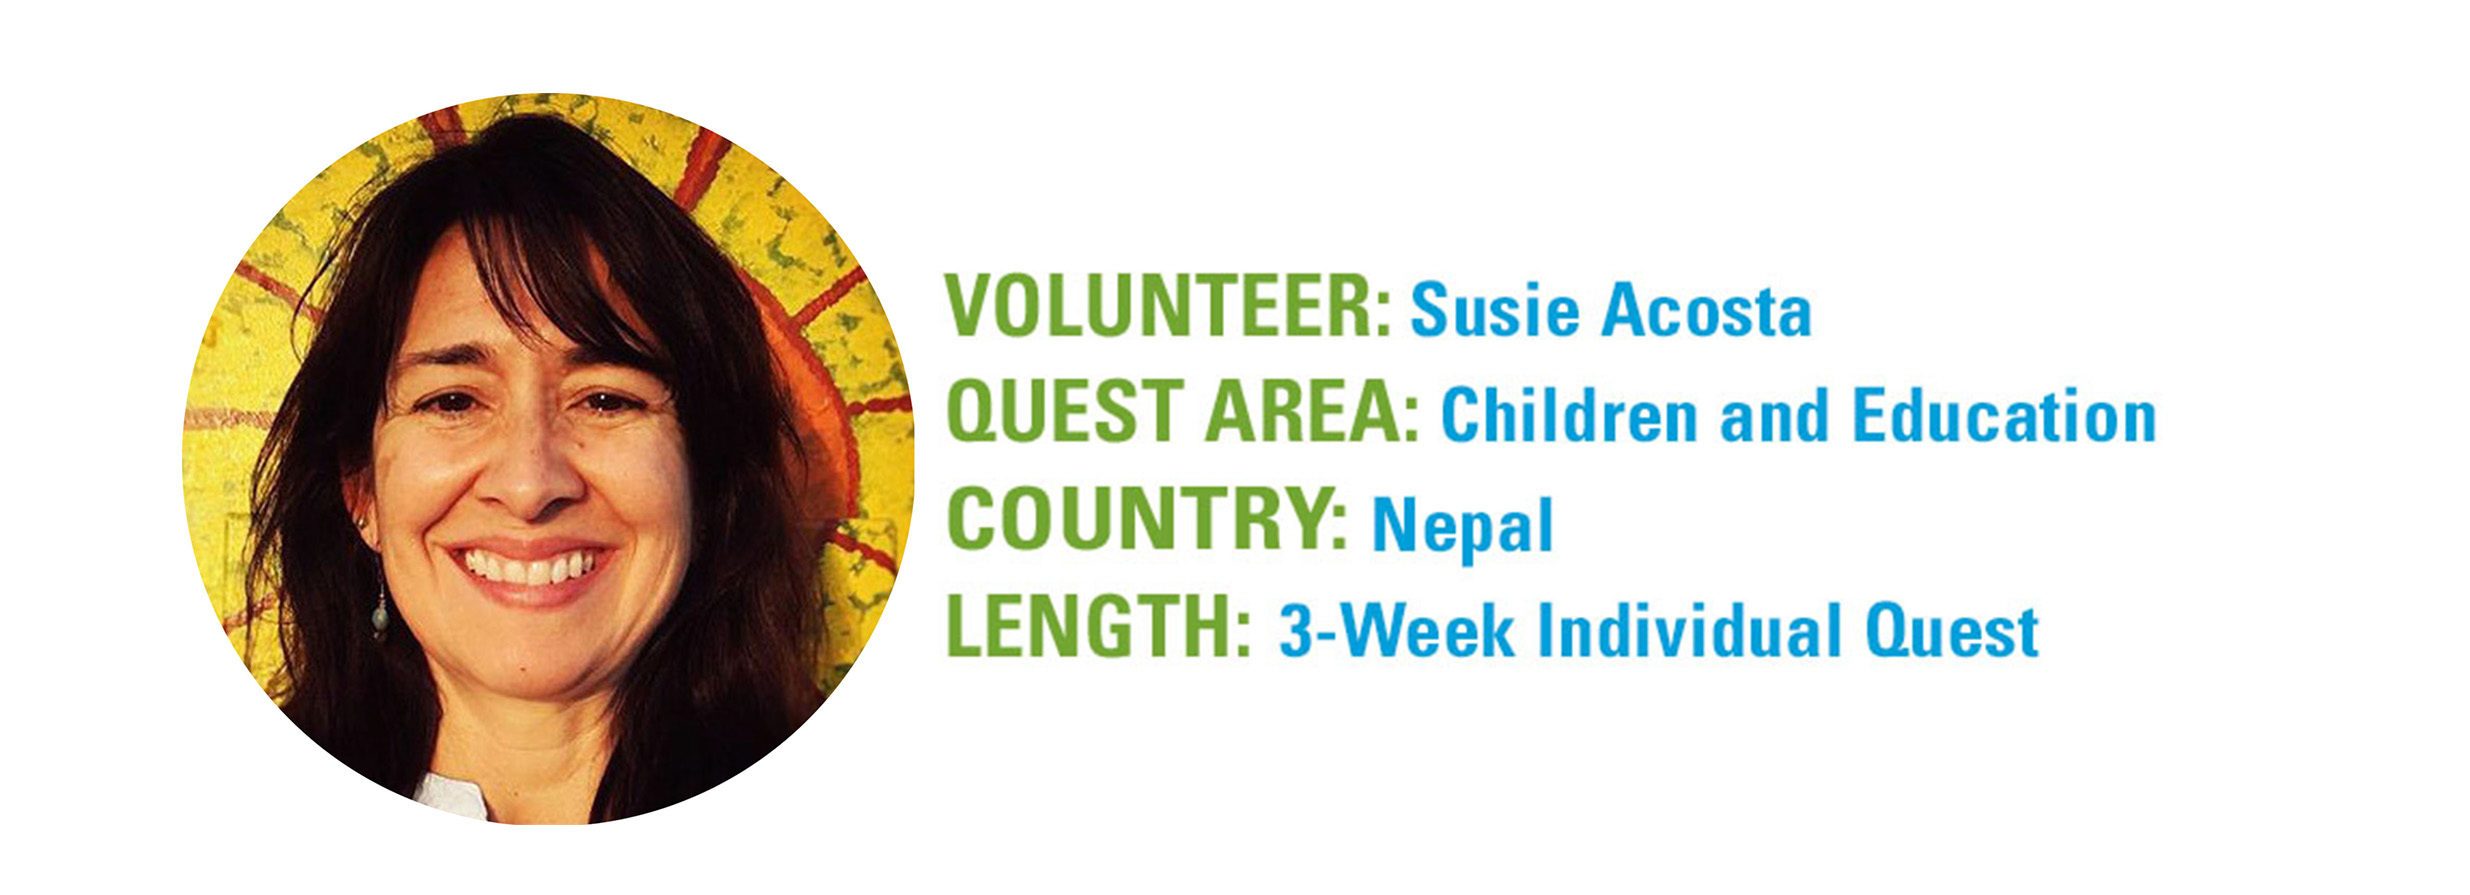 Susana Acosta, a teacher of the deaf at the California School for the Deaf in Freemont, California, returned from a short term Quest to Nepal in July 2016. Susie shares with friends of United Planet about her remarkable experience.